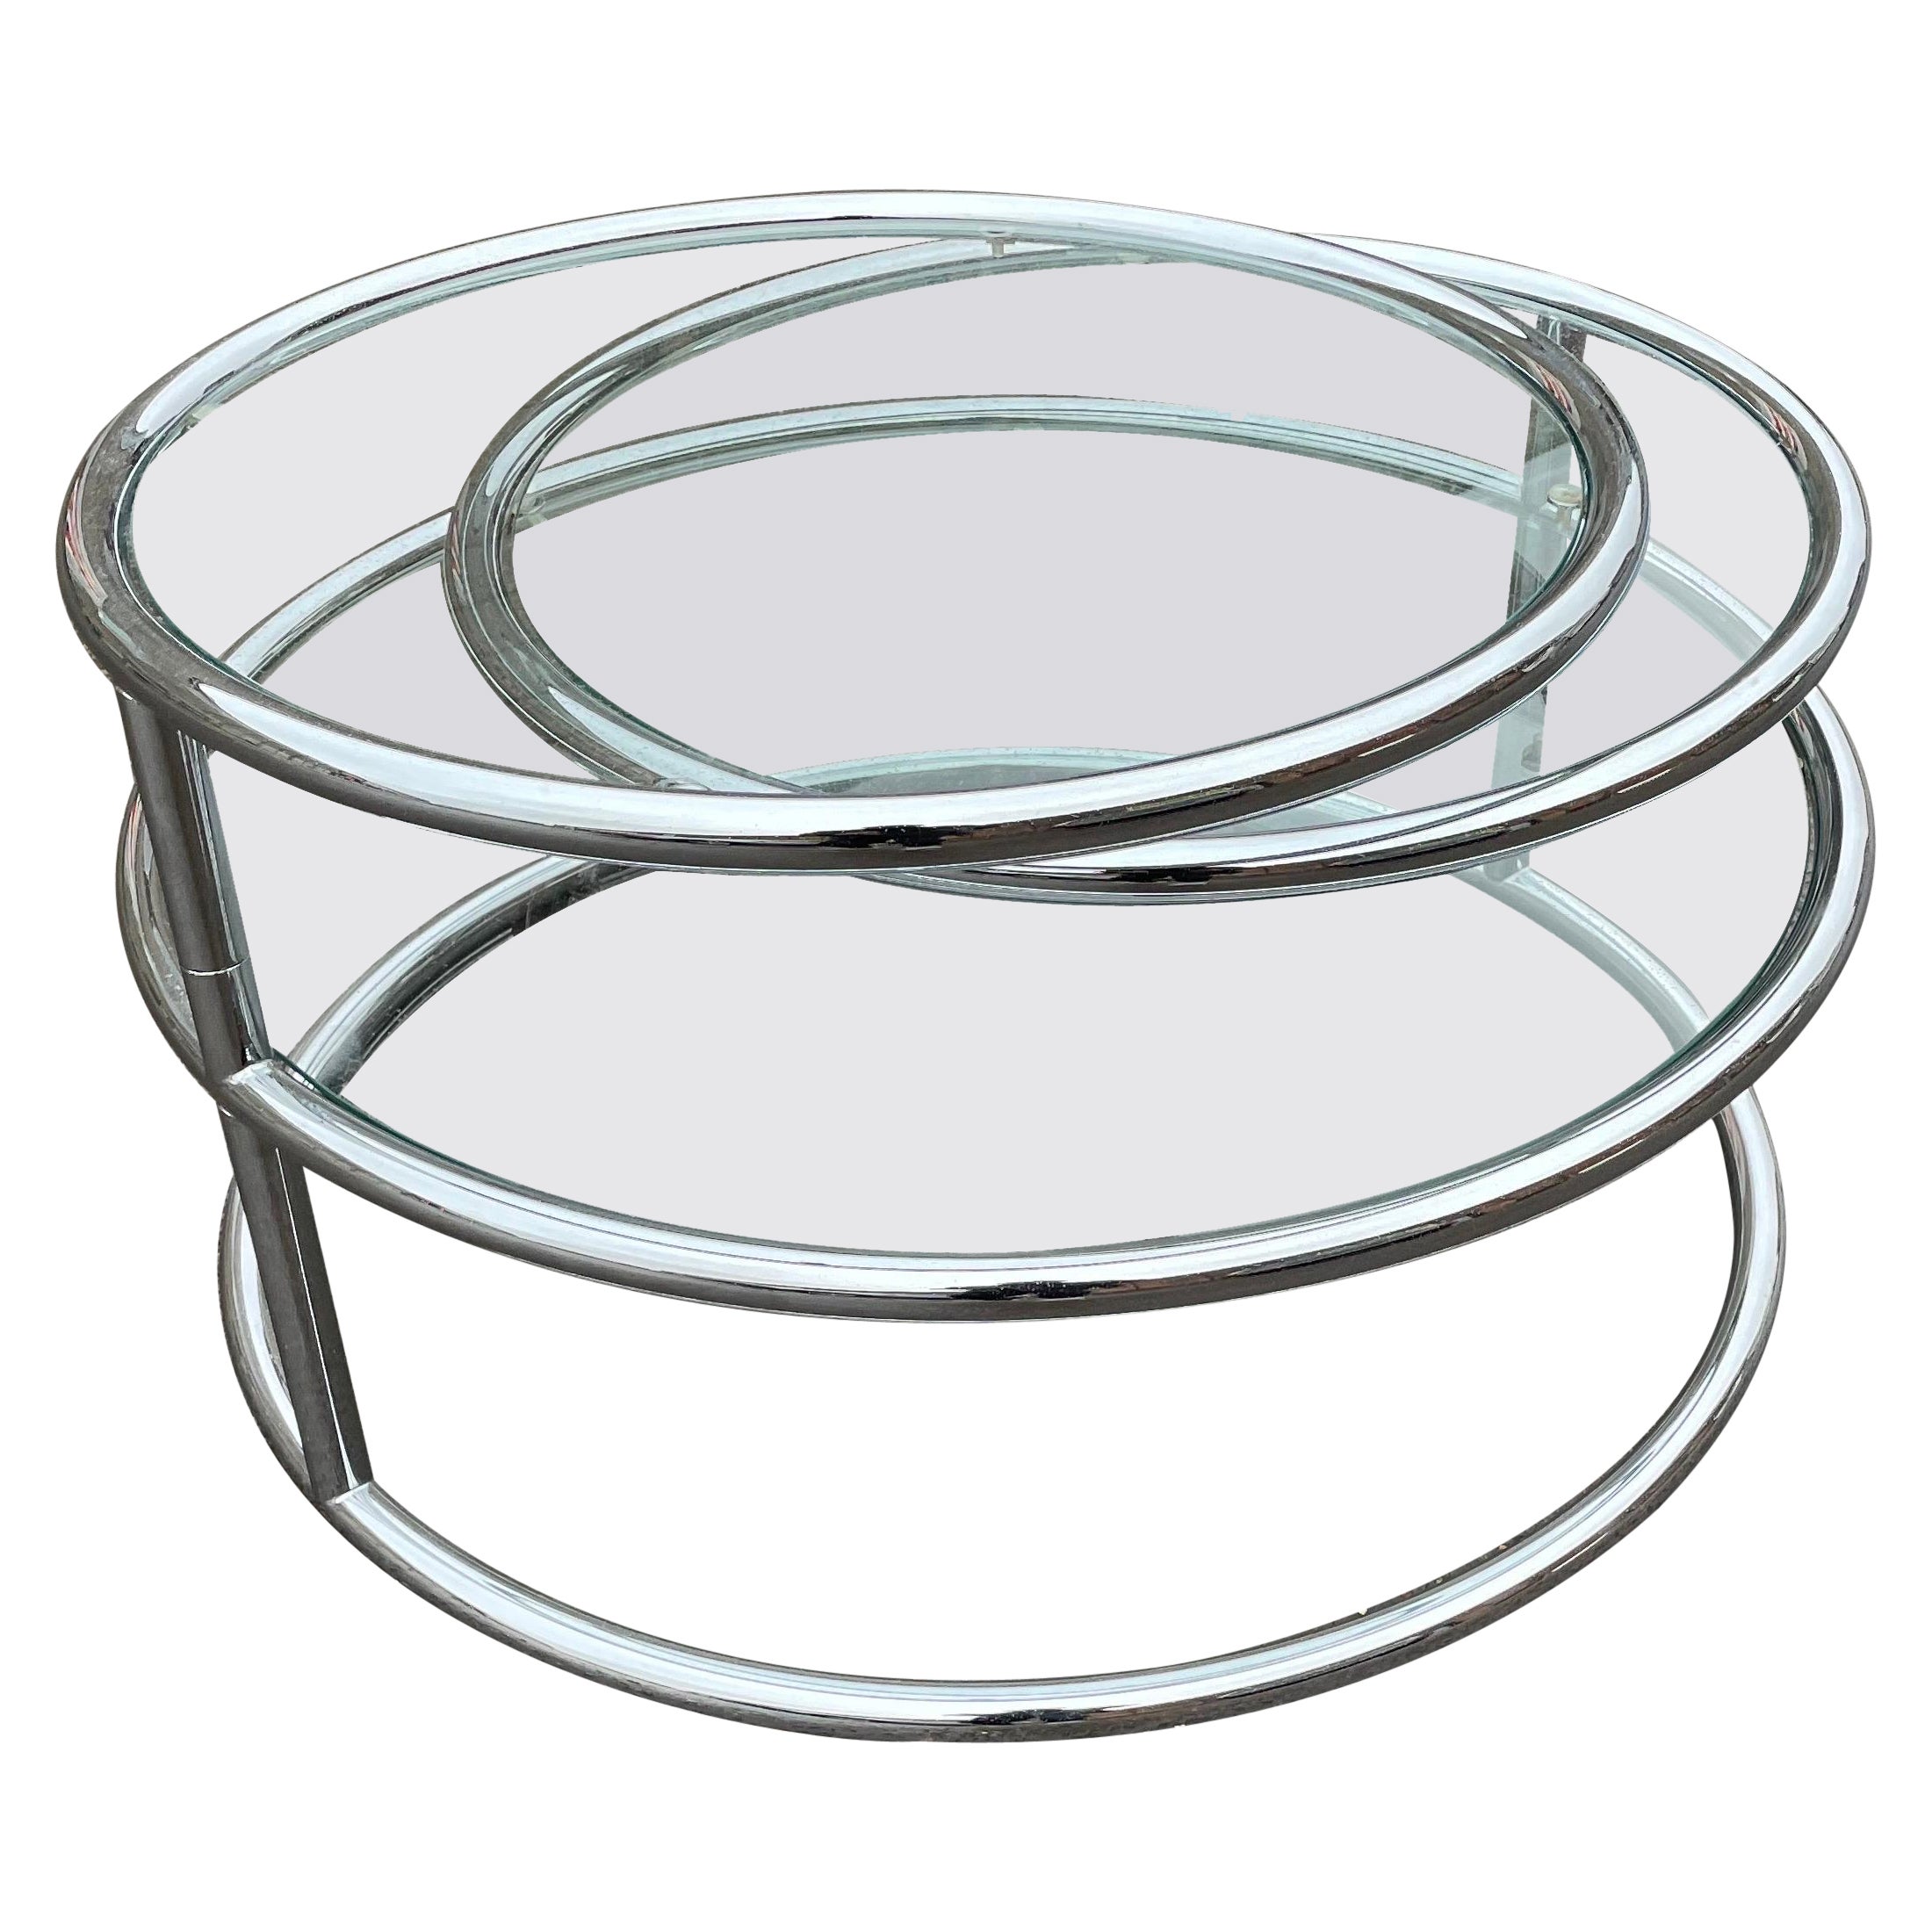 Do round coffee tables take up less space?